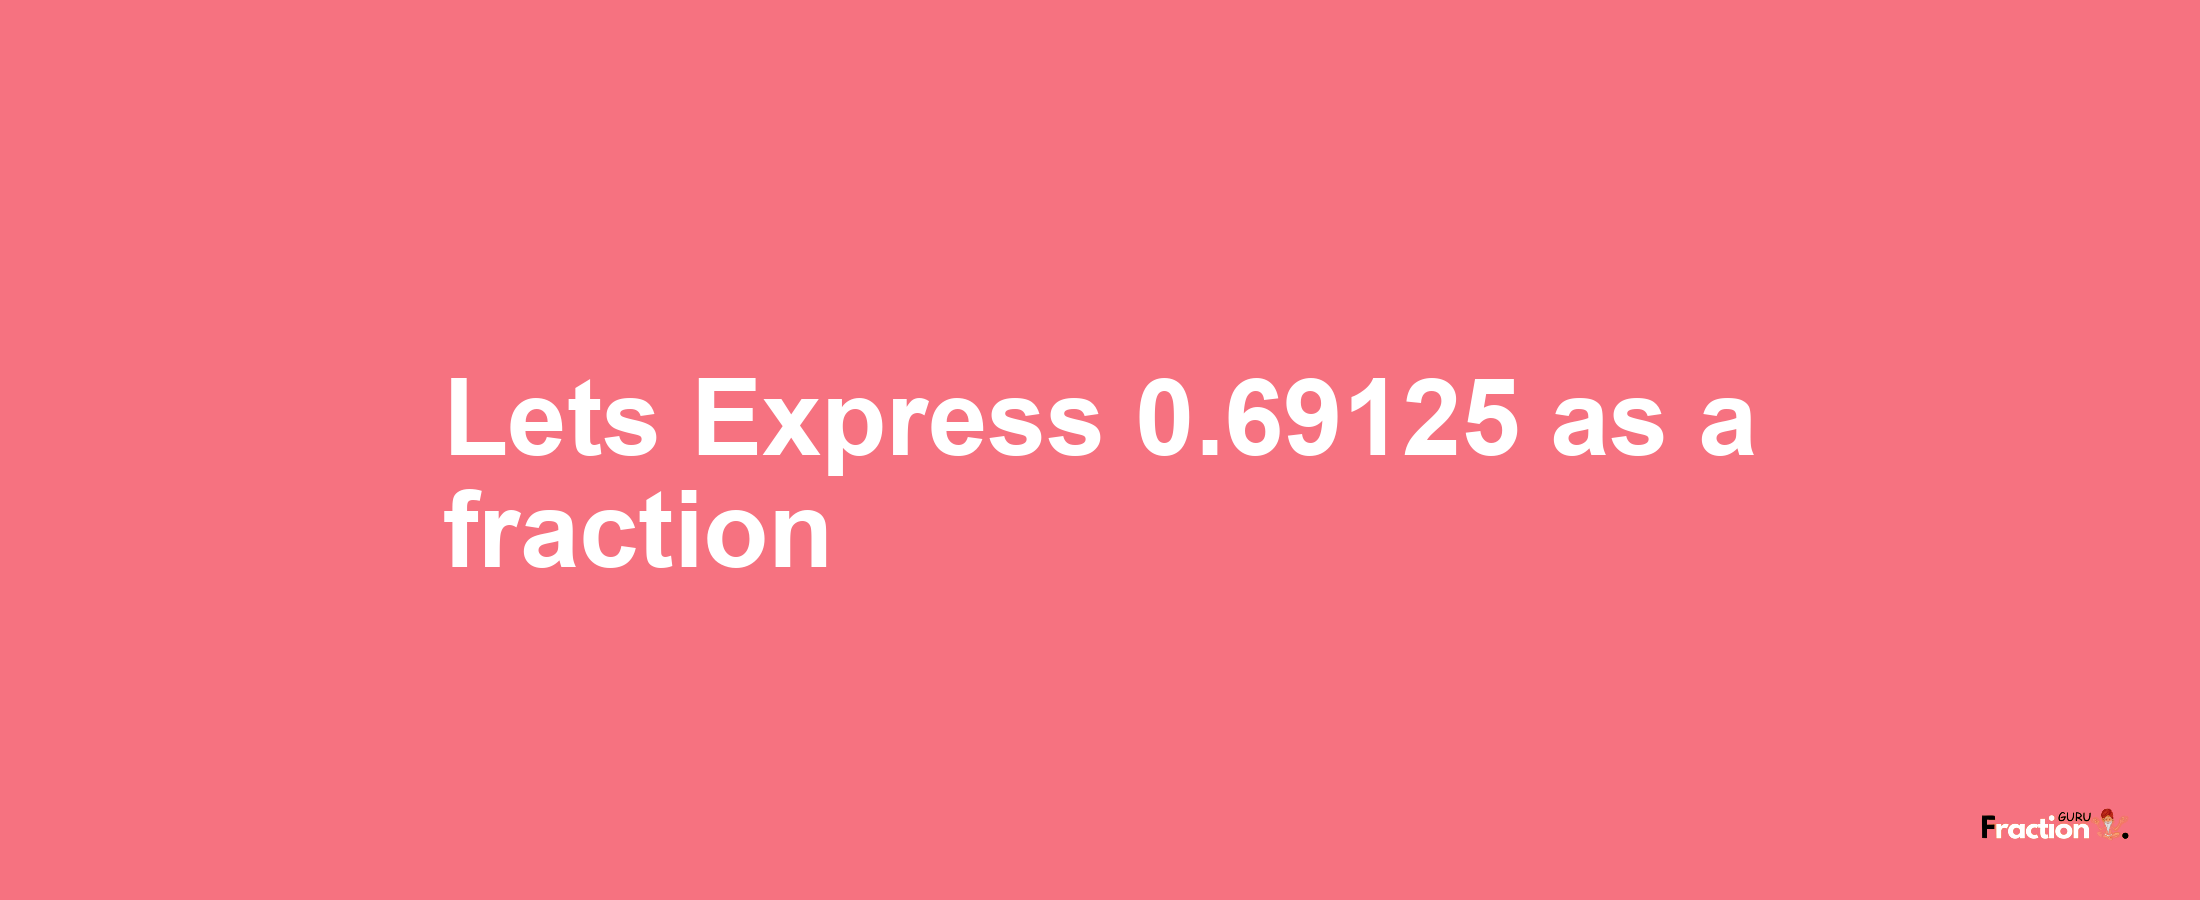 Lets Express 0.69125 as afraction